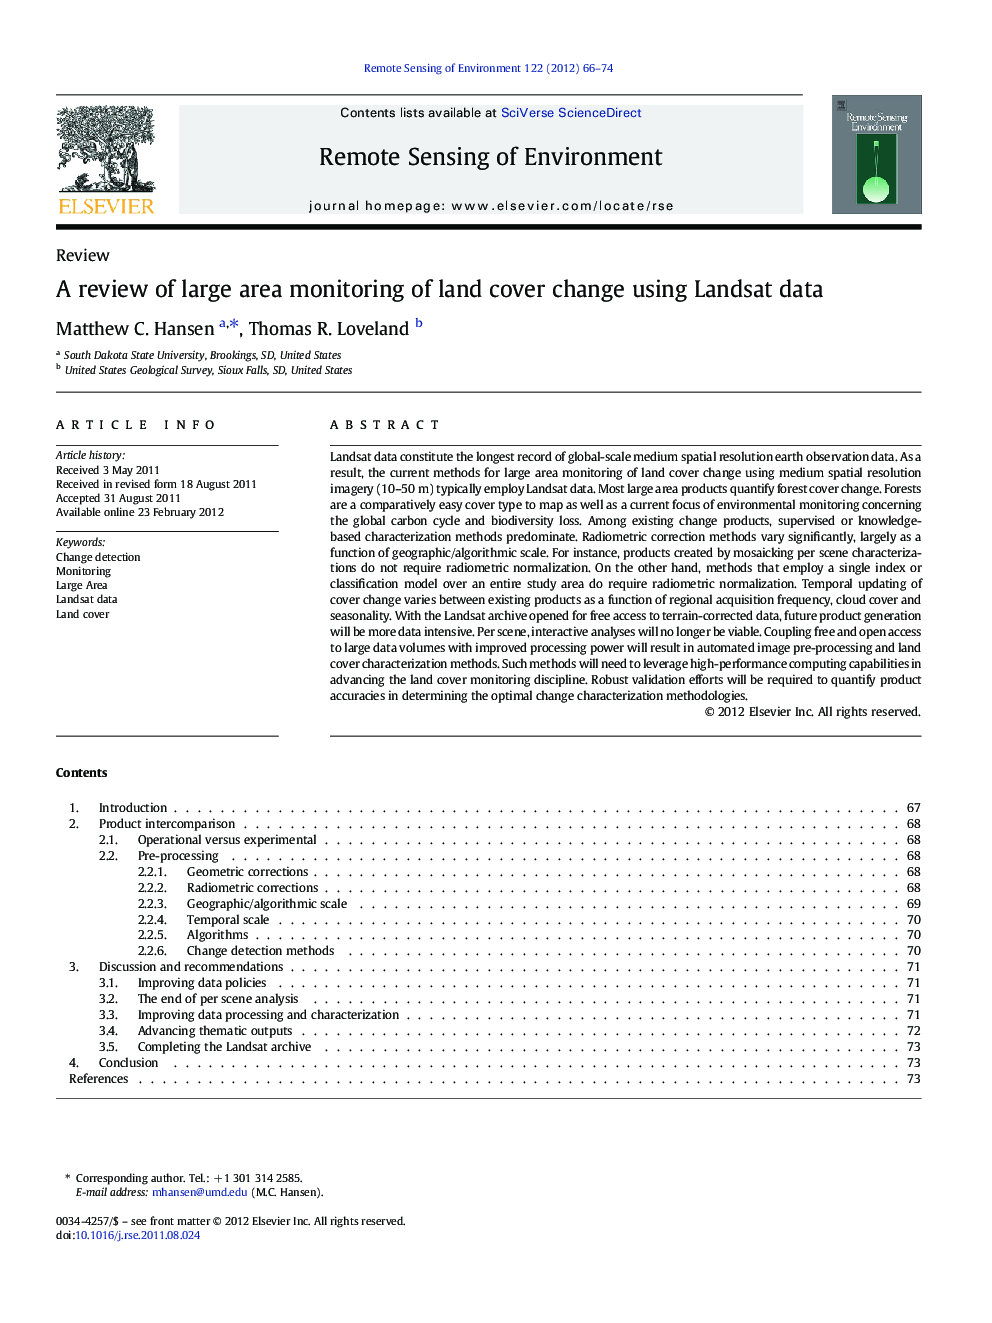 A review of large area monitoring of land cover change using Landsat data